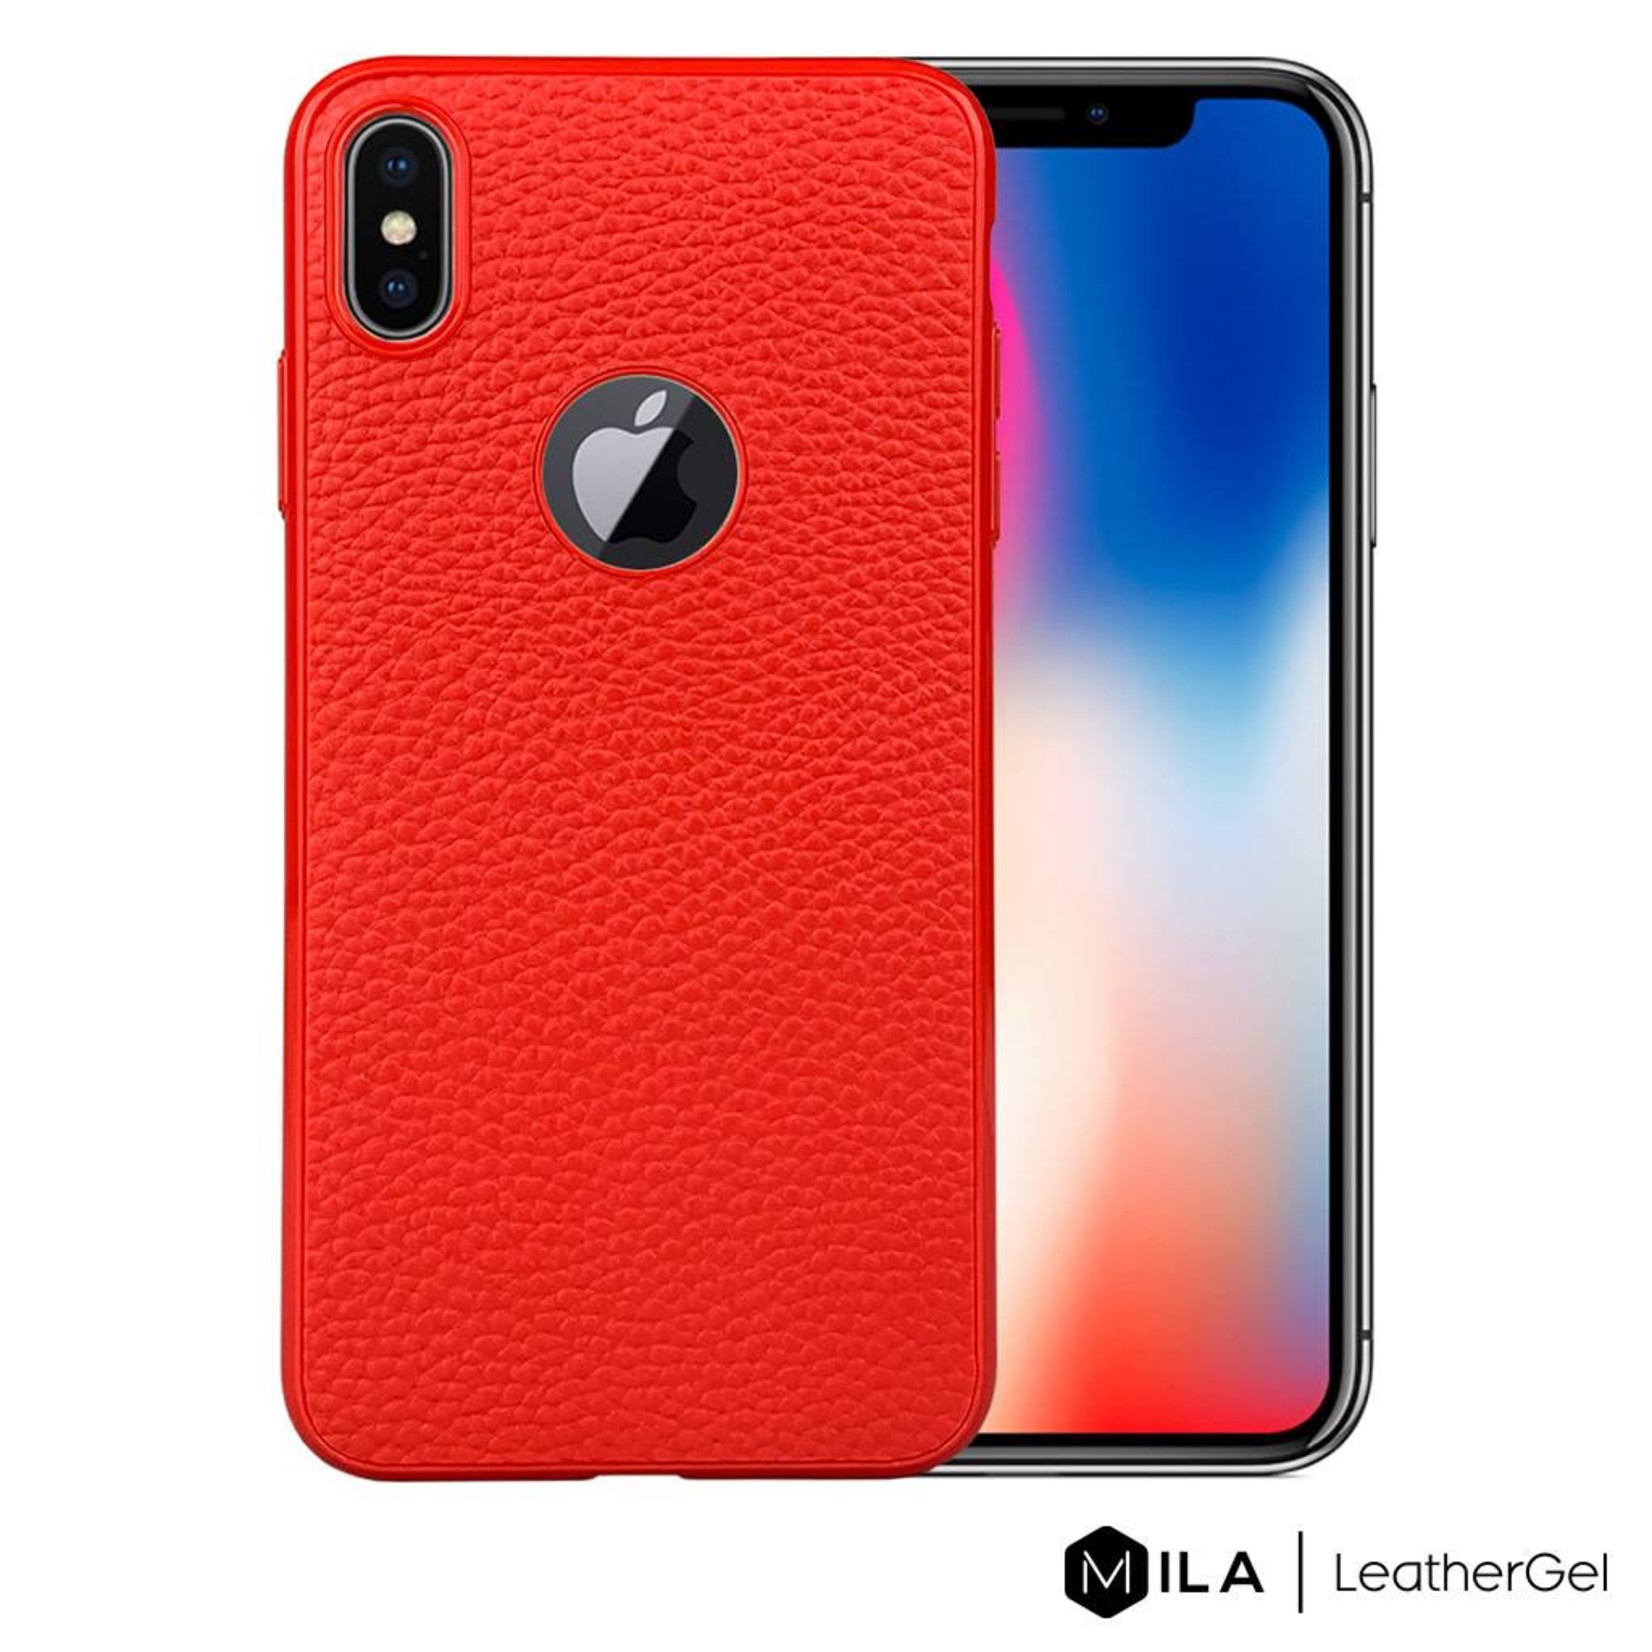 MILA | LeatherGel Case for iPhone XS Max